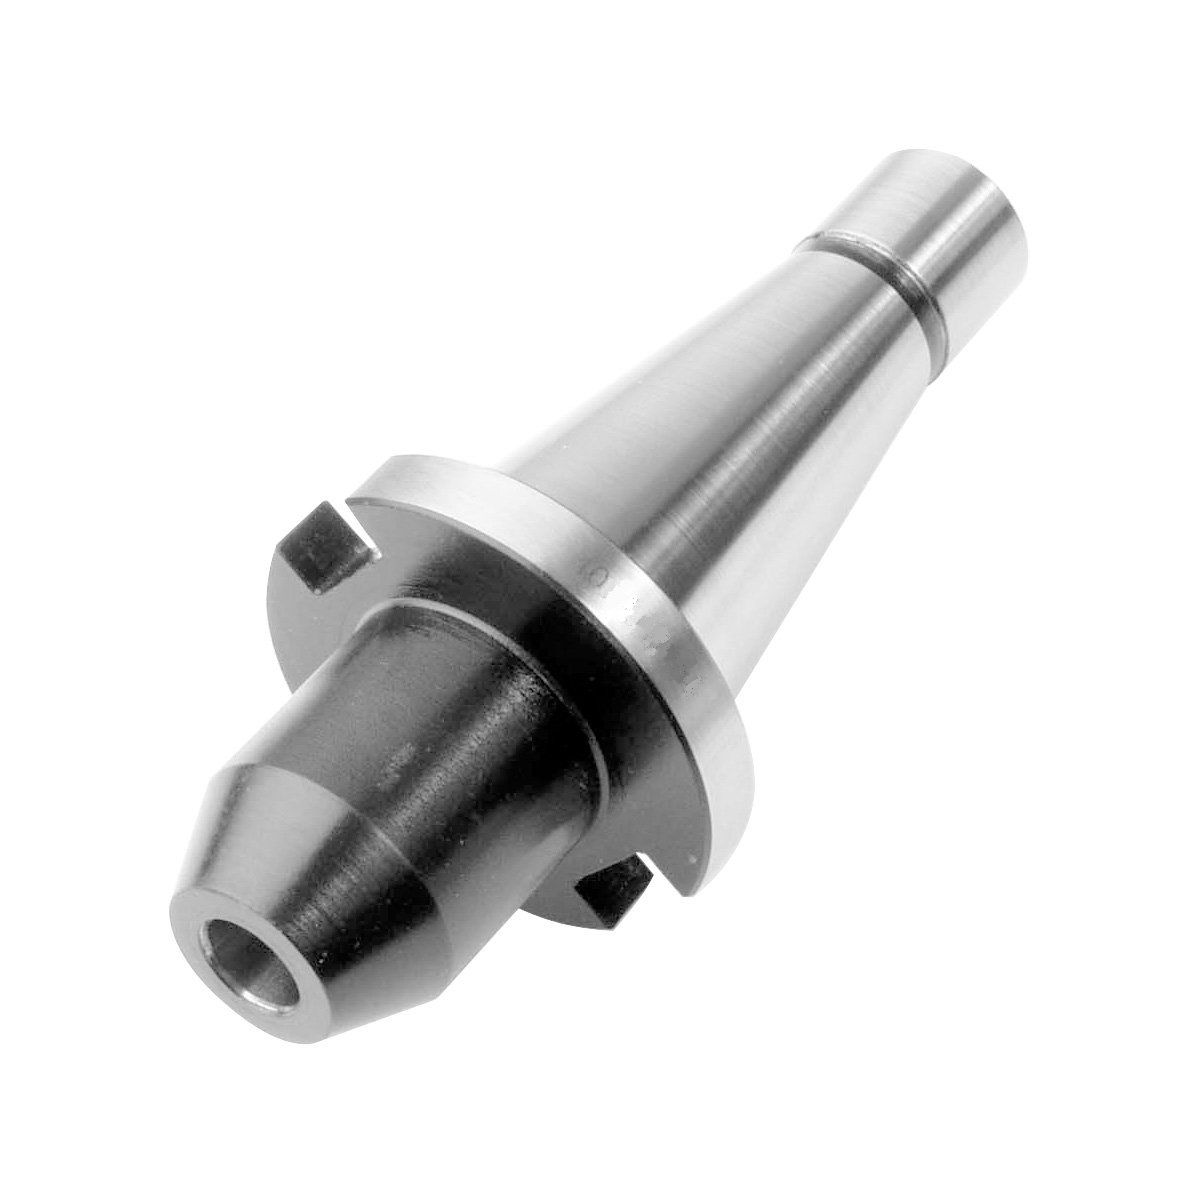 #40 NMTB X 1/2" END MILL HOLDER (3900-1703)